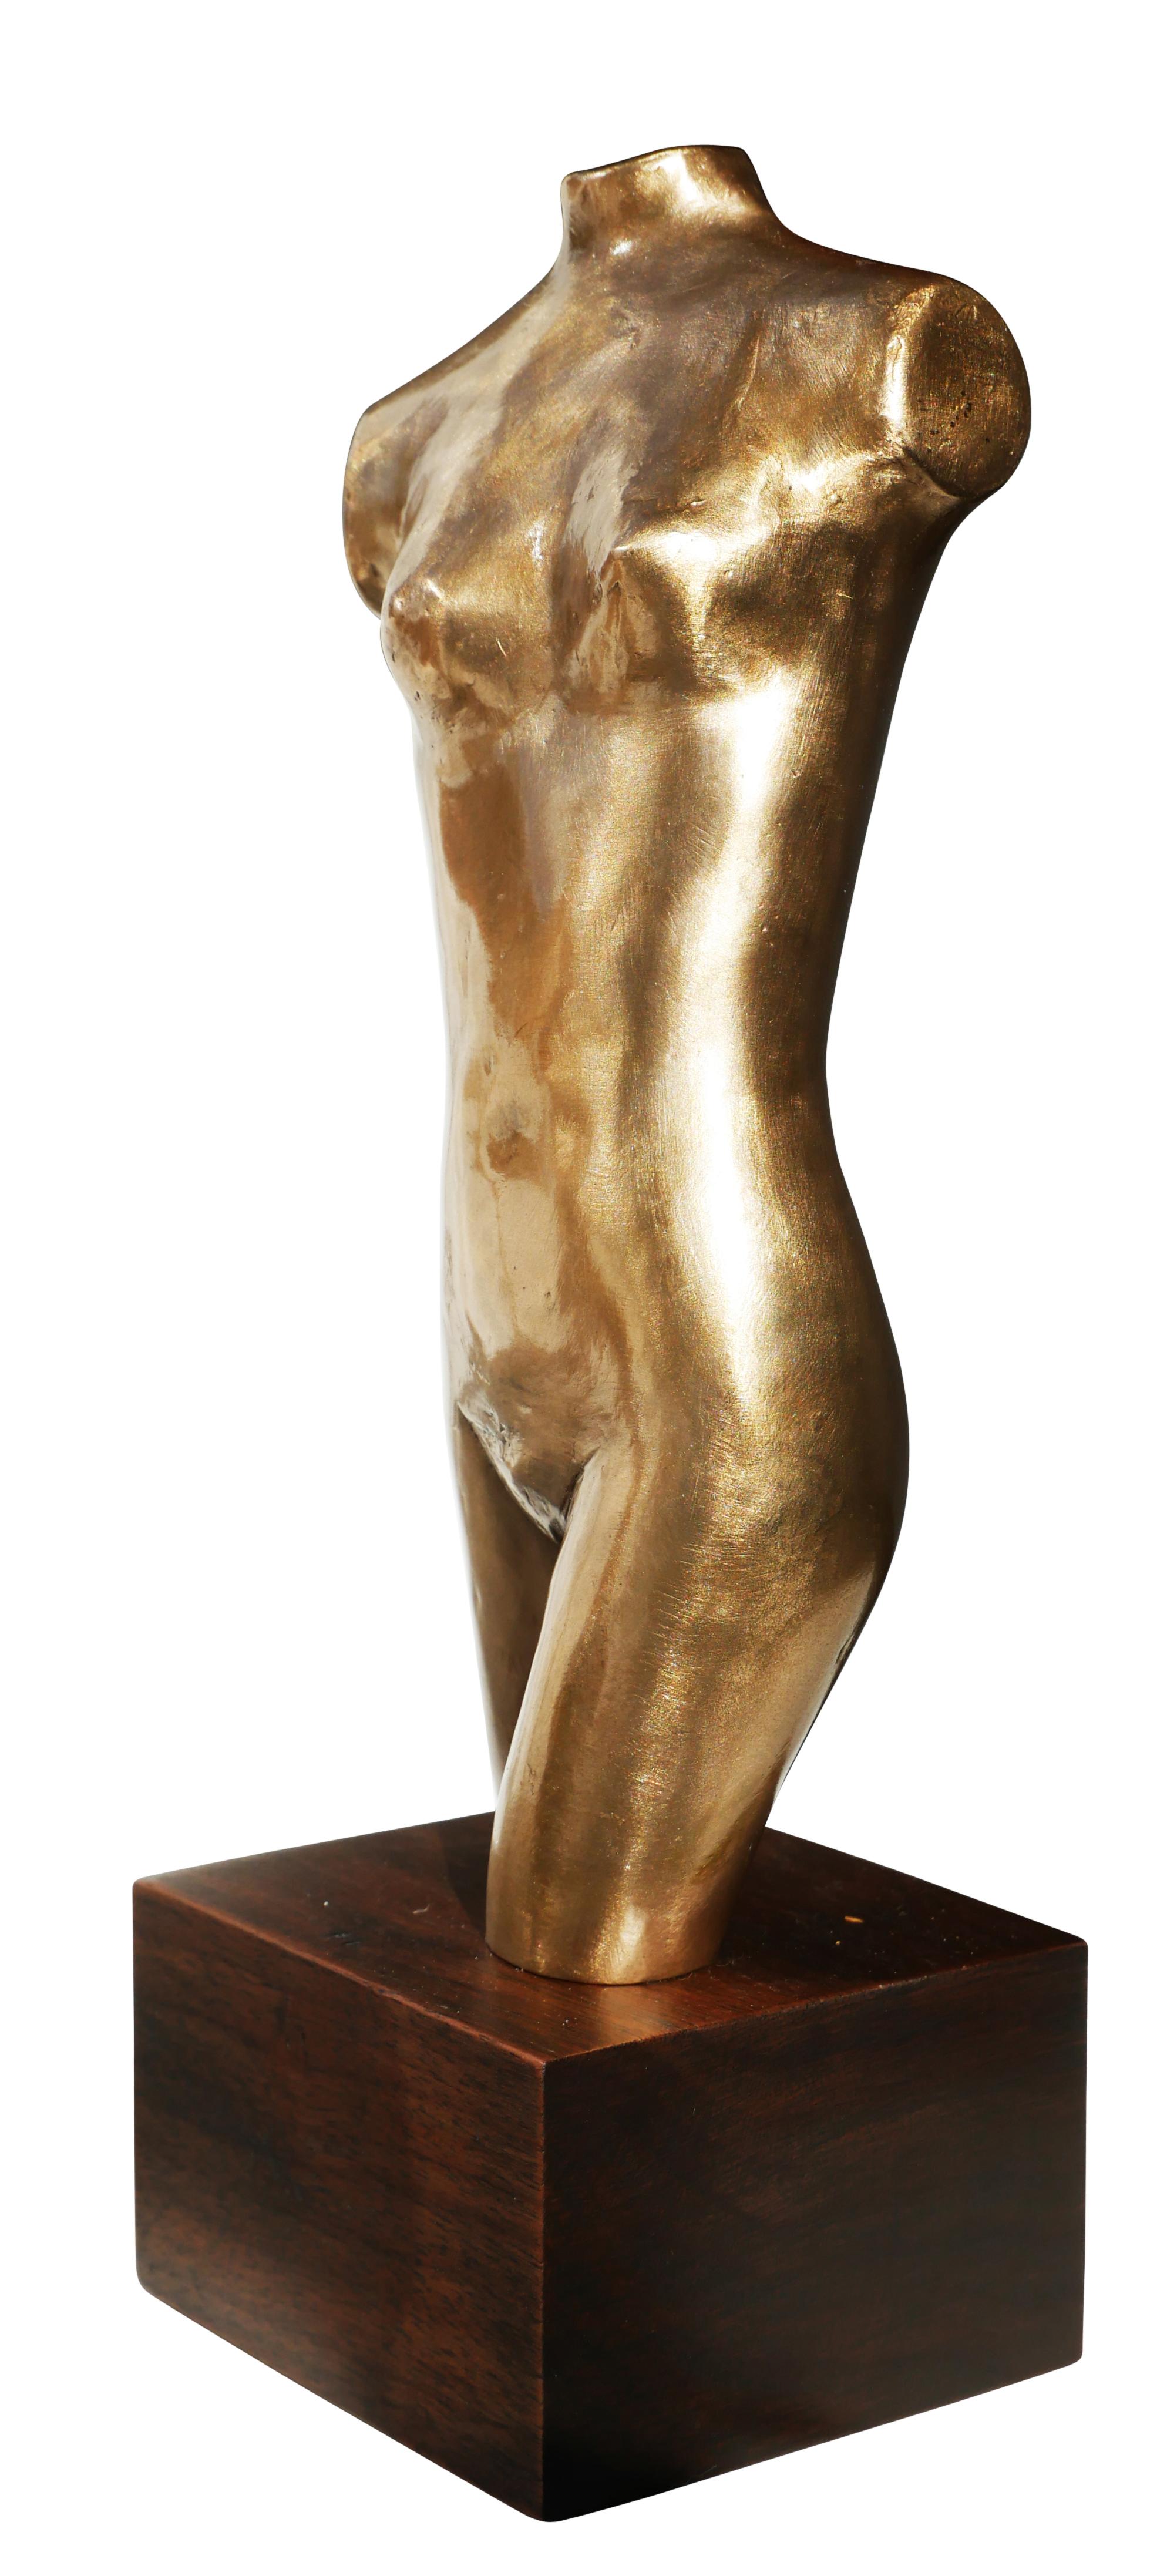 David Adickes - Abstract Modernist Armless Female Nude Torso Bust Bronze  Sculpture For Sale at 1stDibs